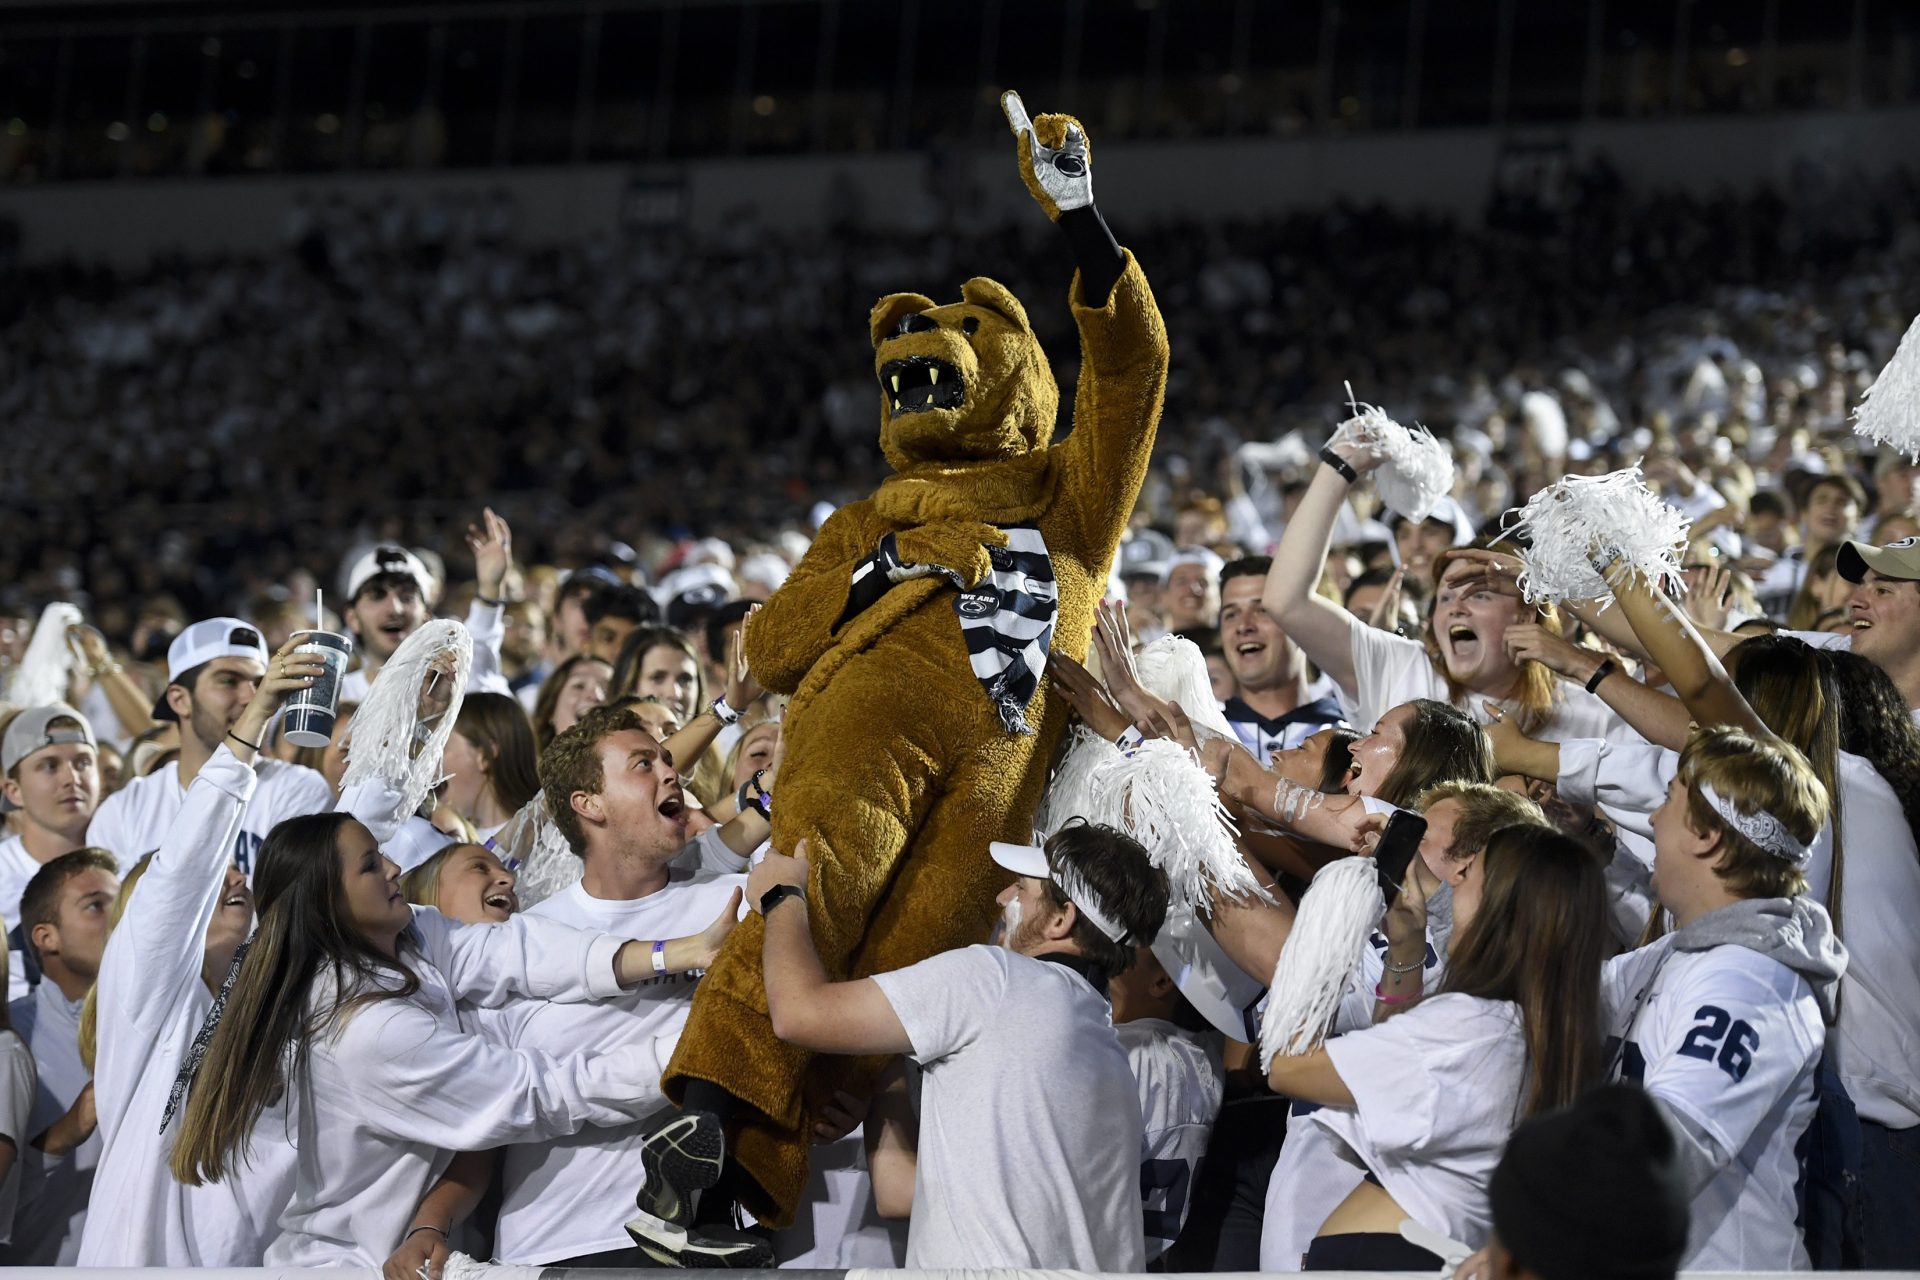 The Penn State Nittany Lion mascot celebrates with the student section during an NCAA college football game against Indiana in State College, Pa., on Saturday, Oct. 02, 2021.